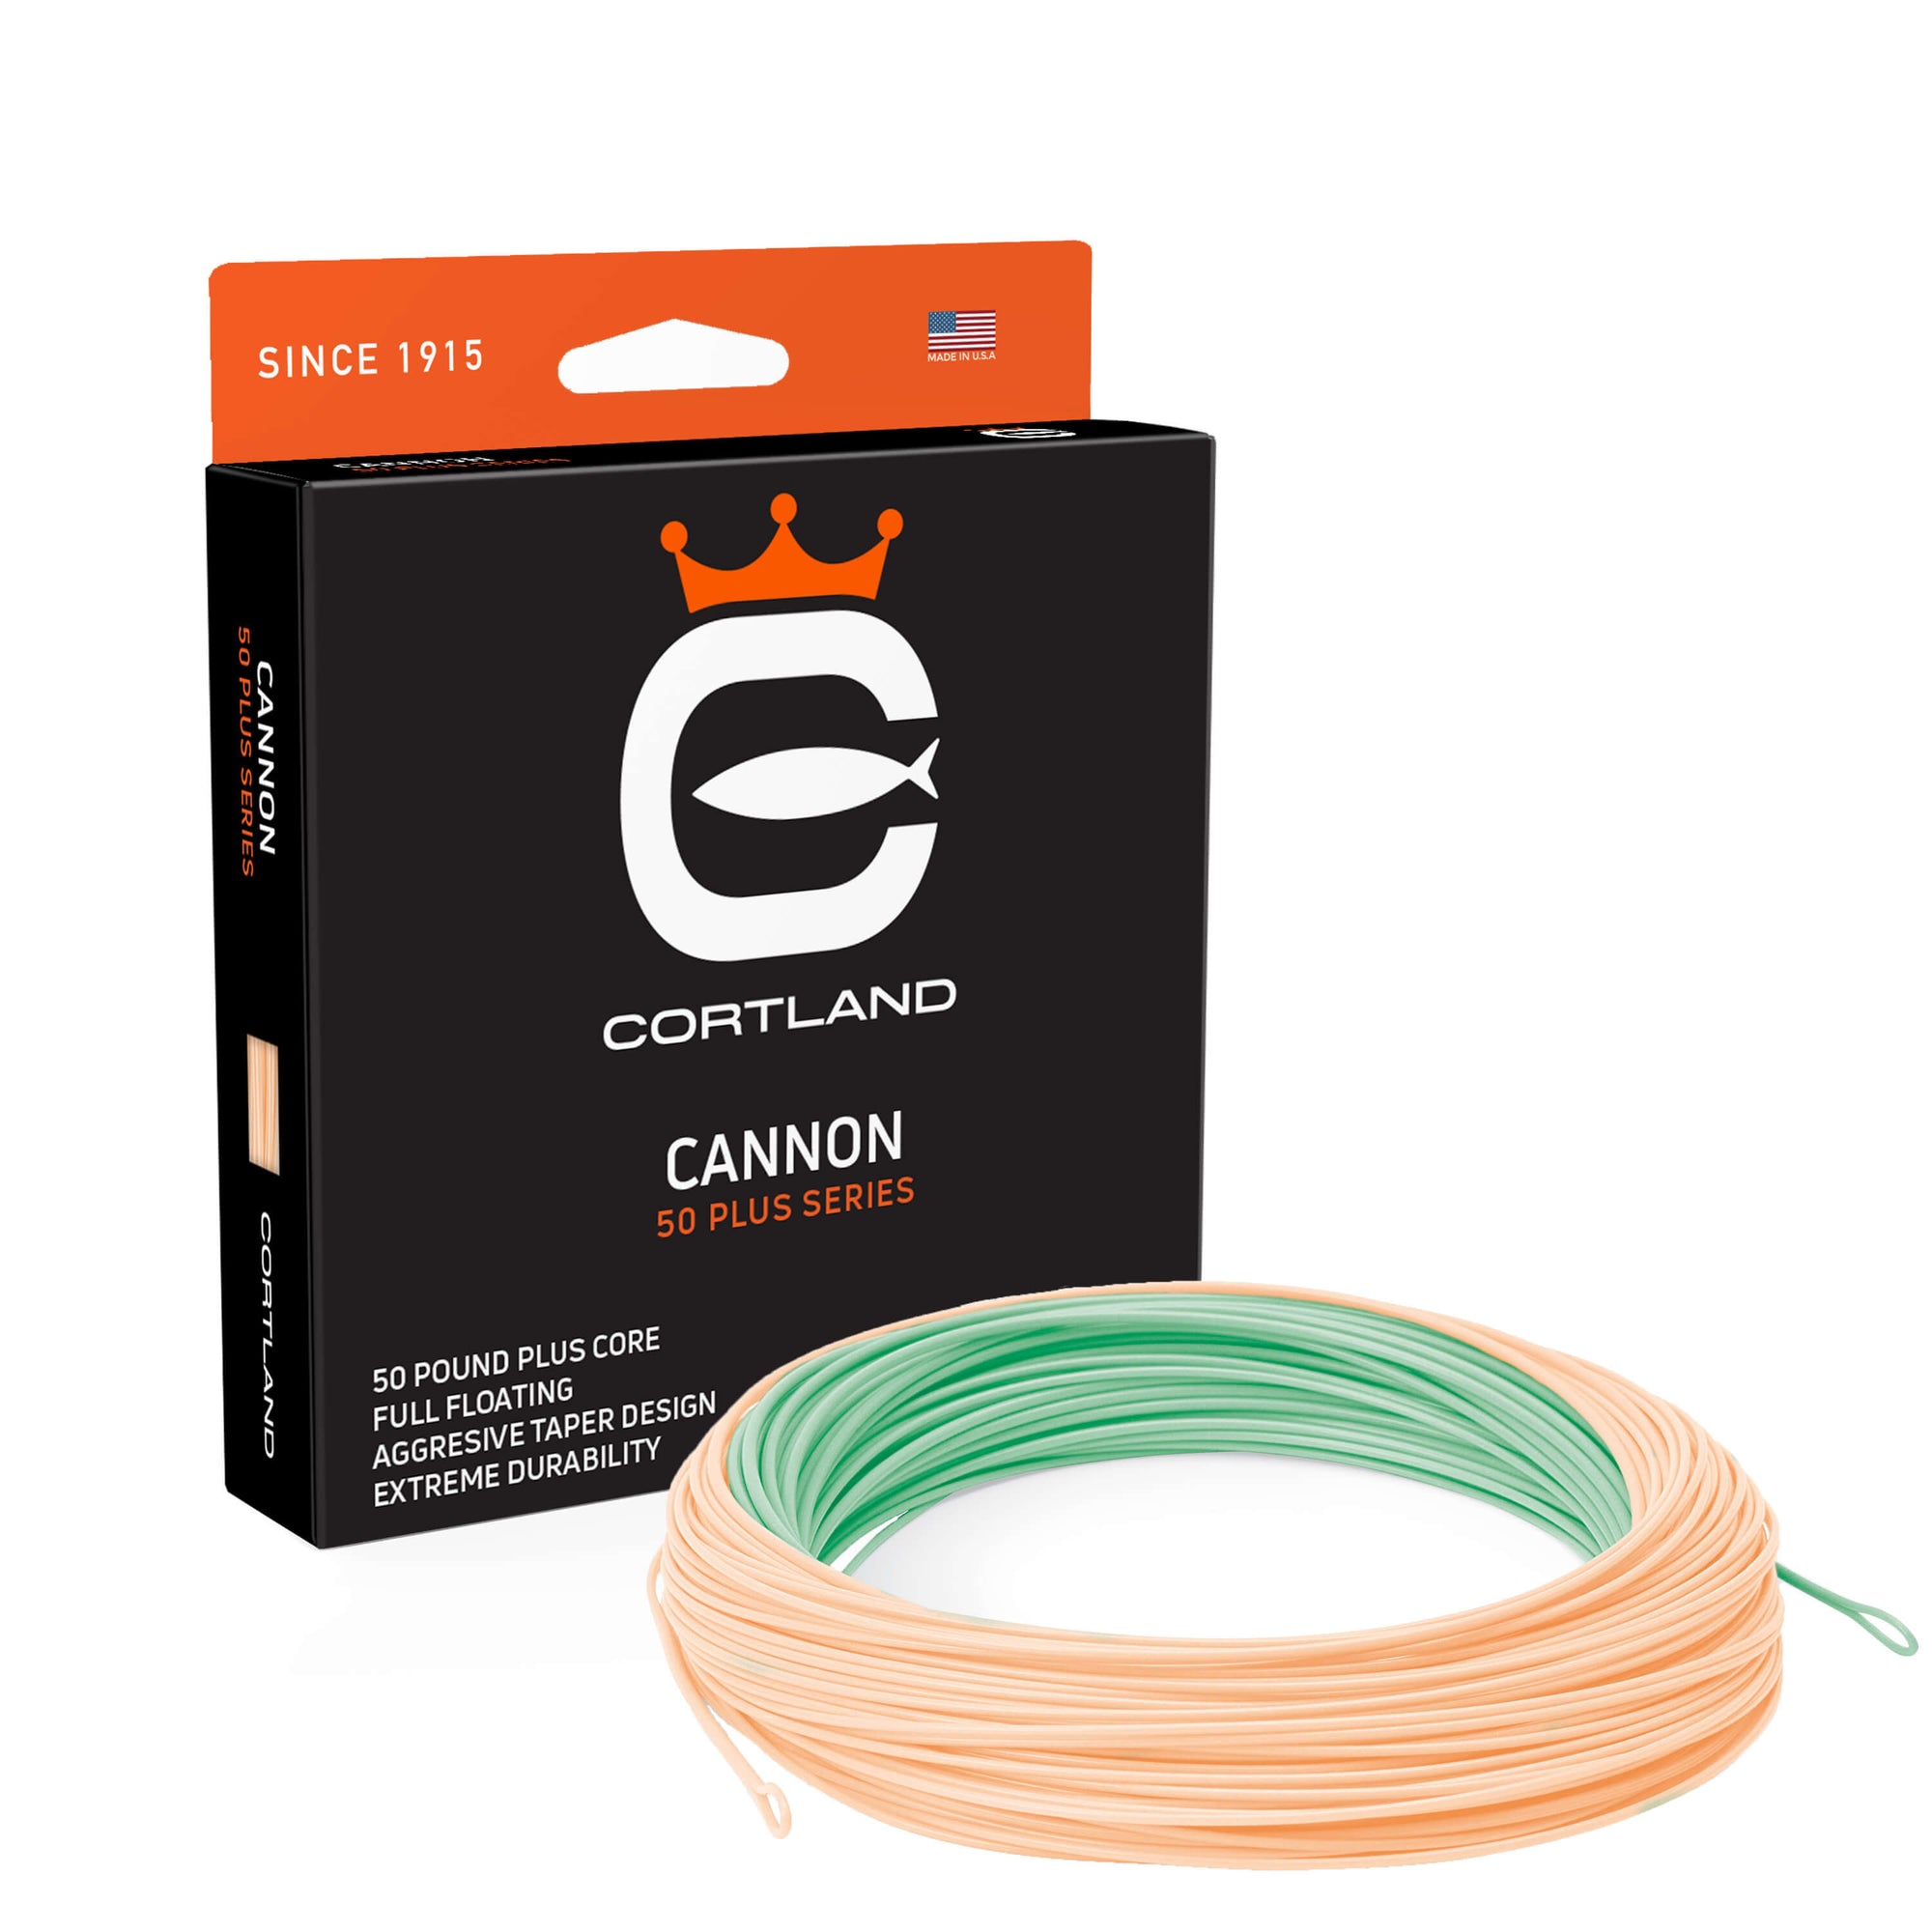 50+ Series Saltwater Fly Lines – Cortland Line Company